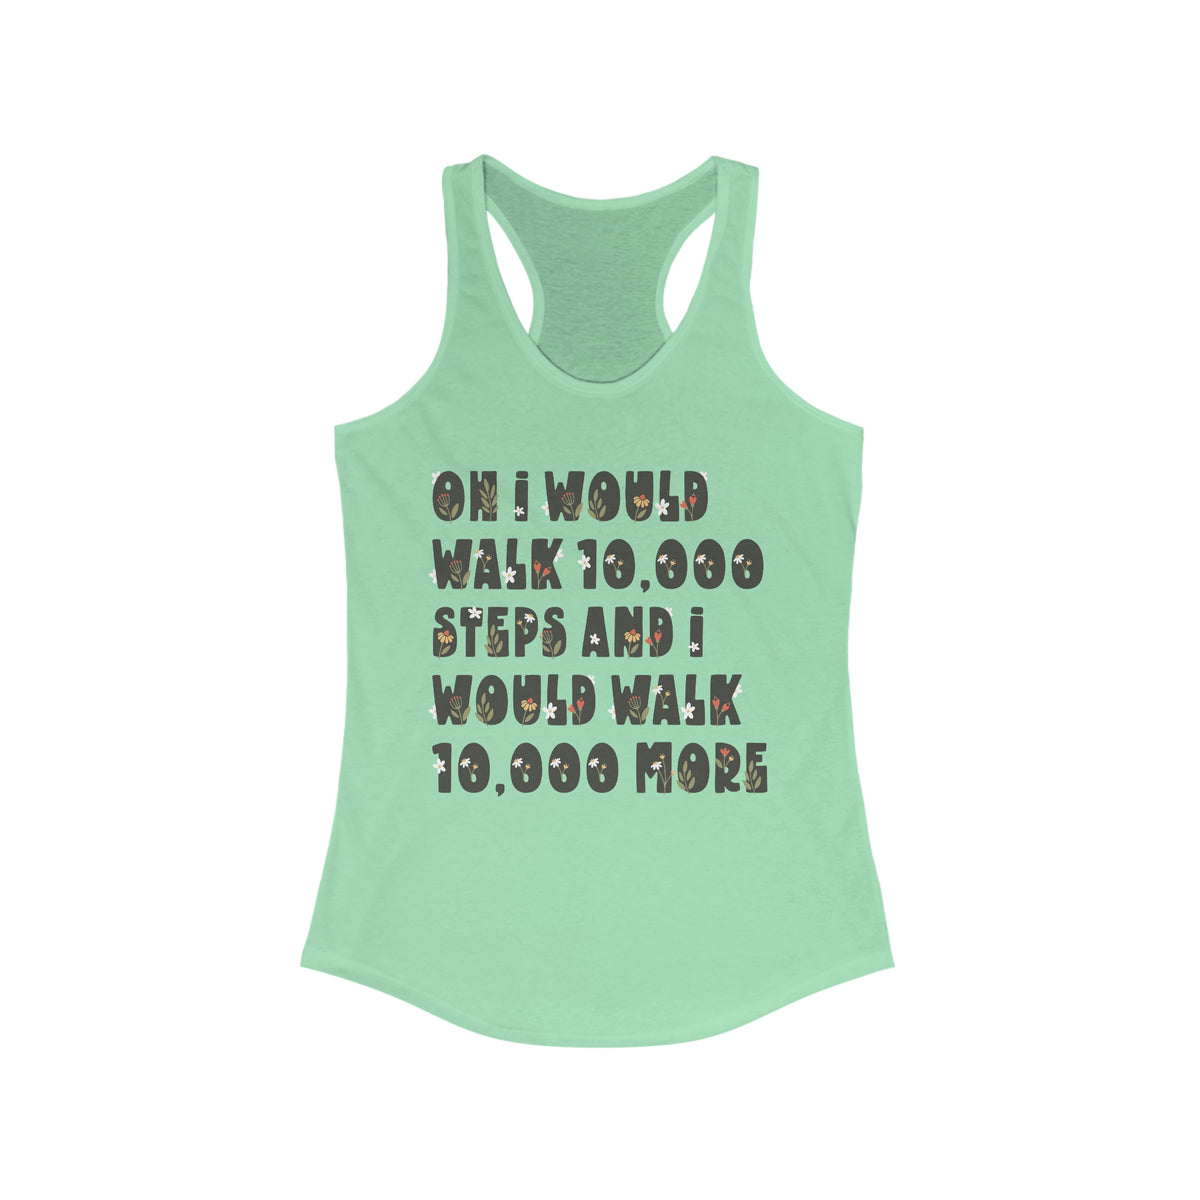 10,000 Steps Funny Fitness Tracker Shirt | Walking Workout Shirt | Gift For Her | Women's Slim-fit Racerback Tank Top